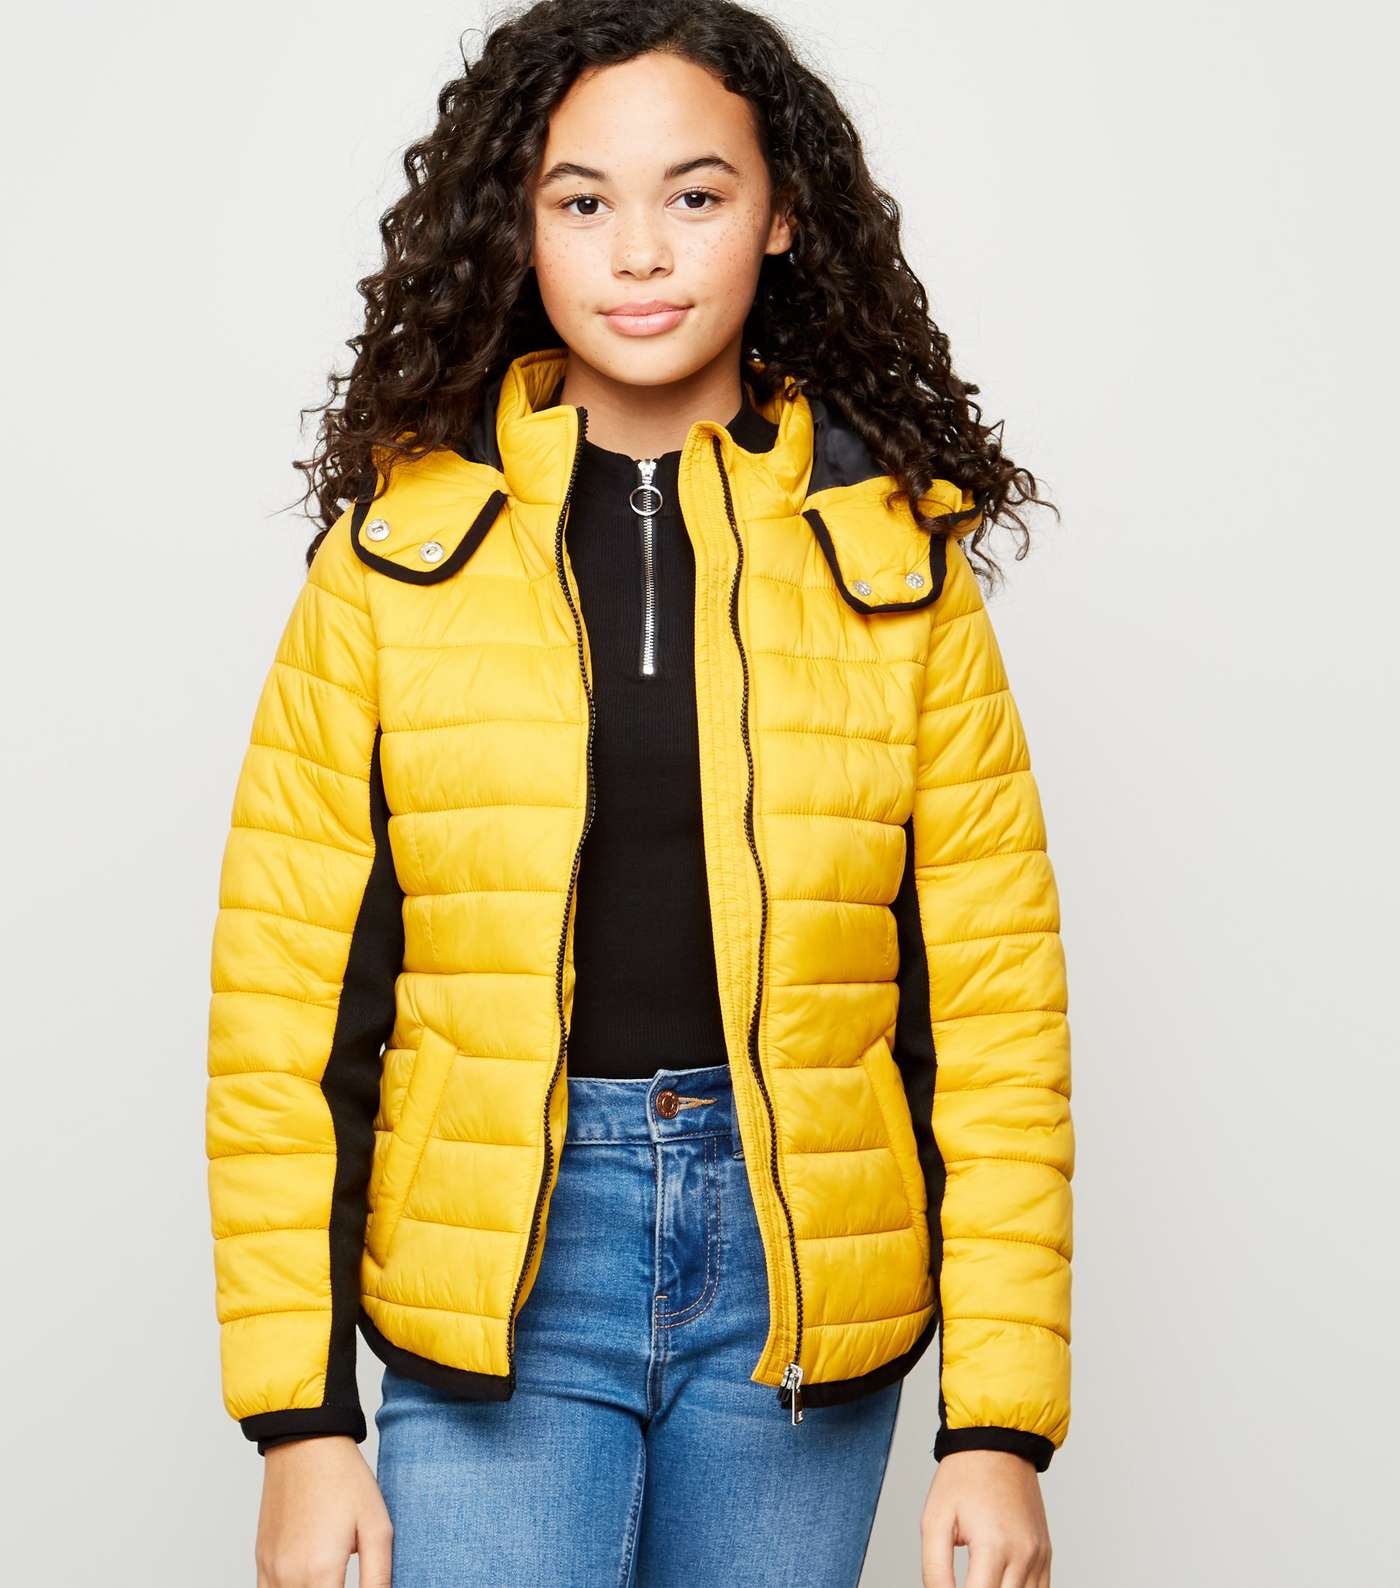 Girls Mustard Piped Contrast Puffer Jacket 